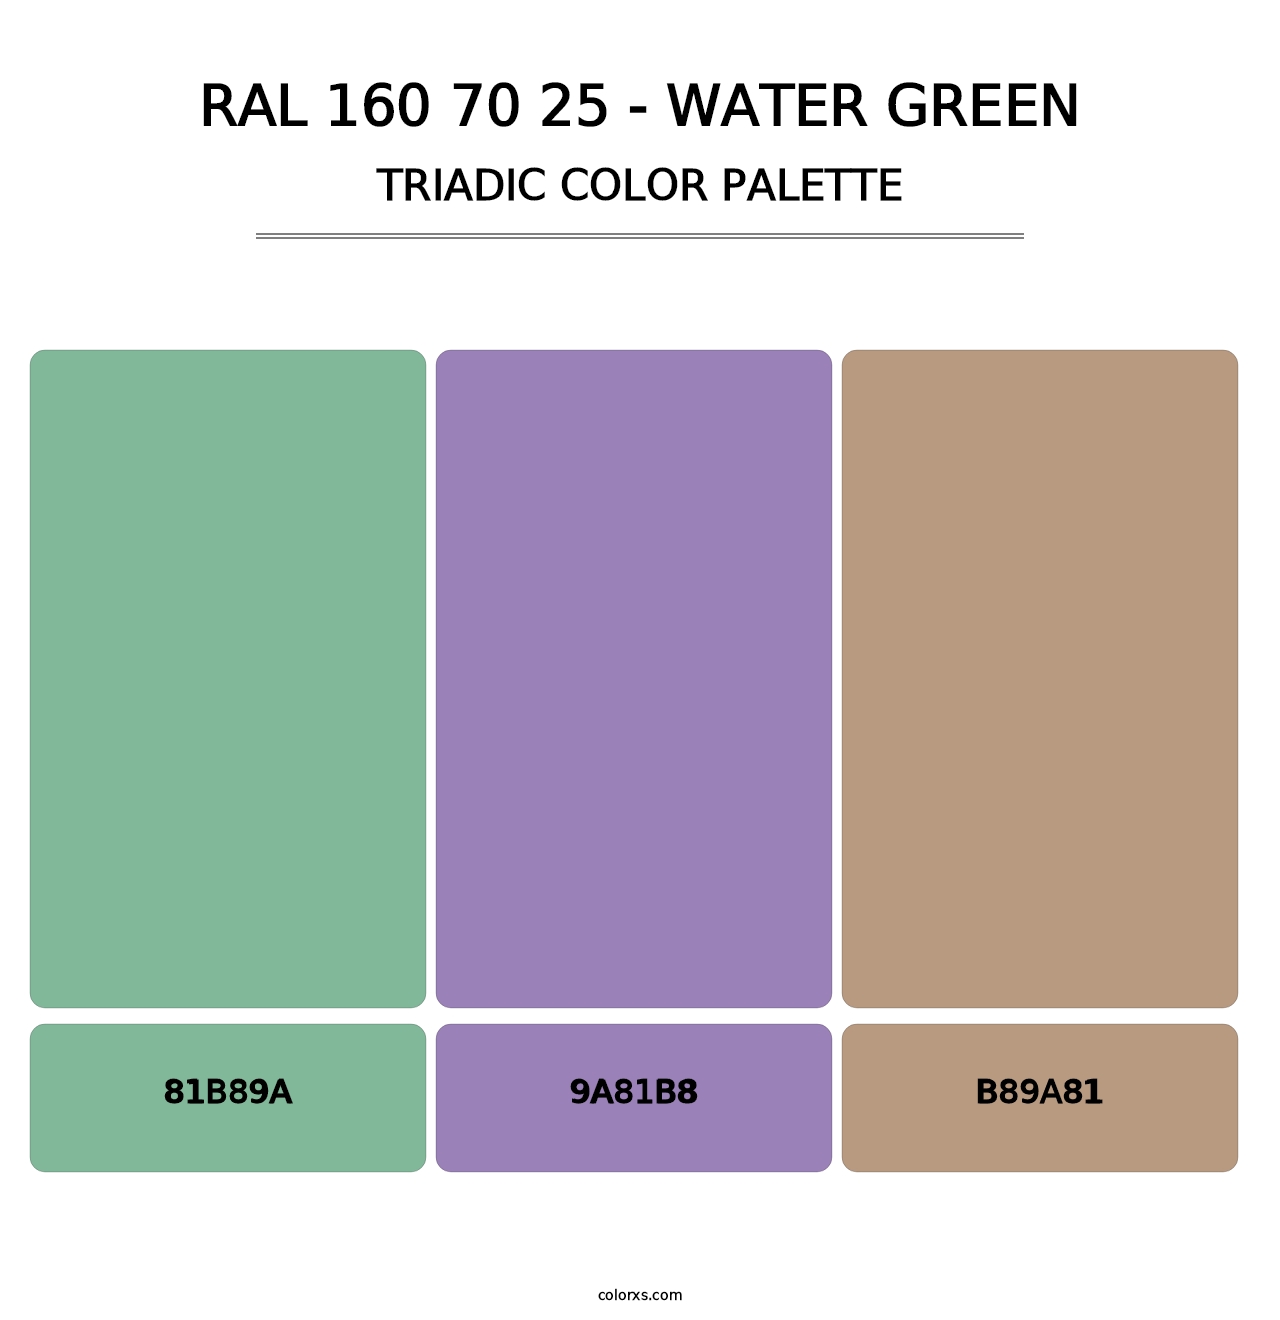 RAL 160 70 25 - Water Green - Triadic Color Palette